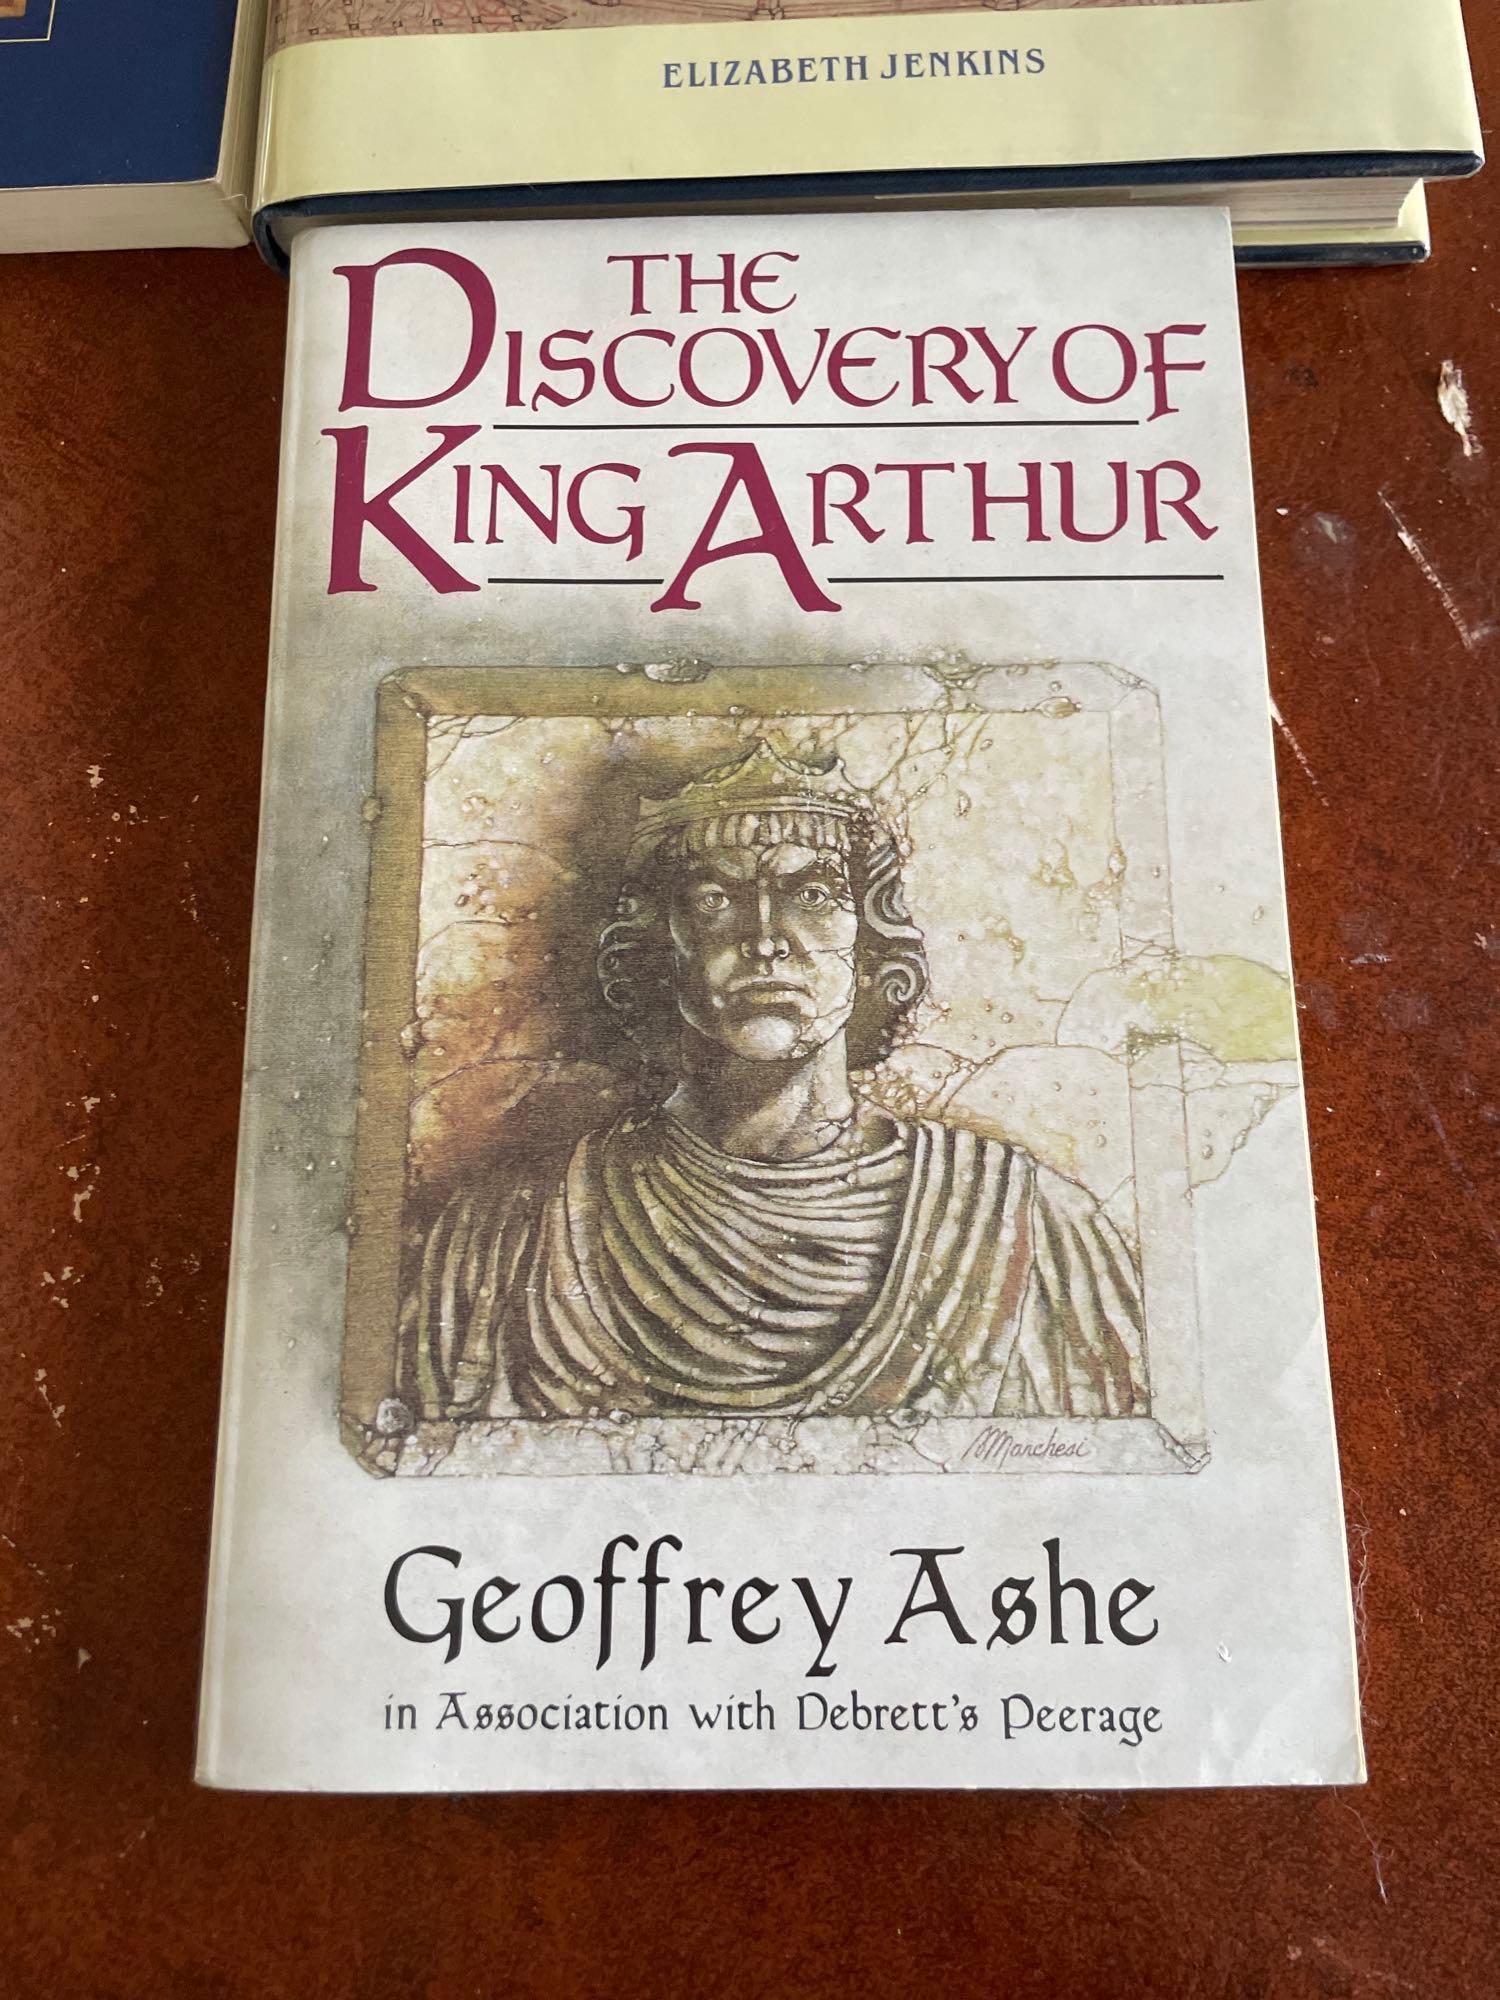 King Arthur, Merlin, and Dark Ages Books (4)